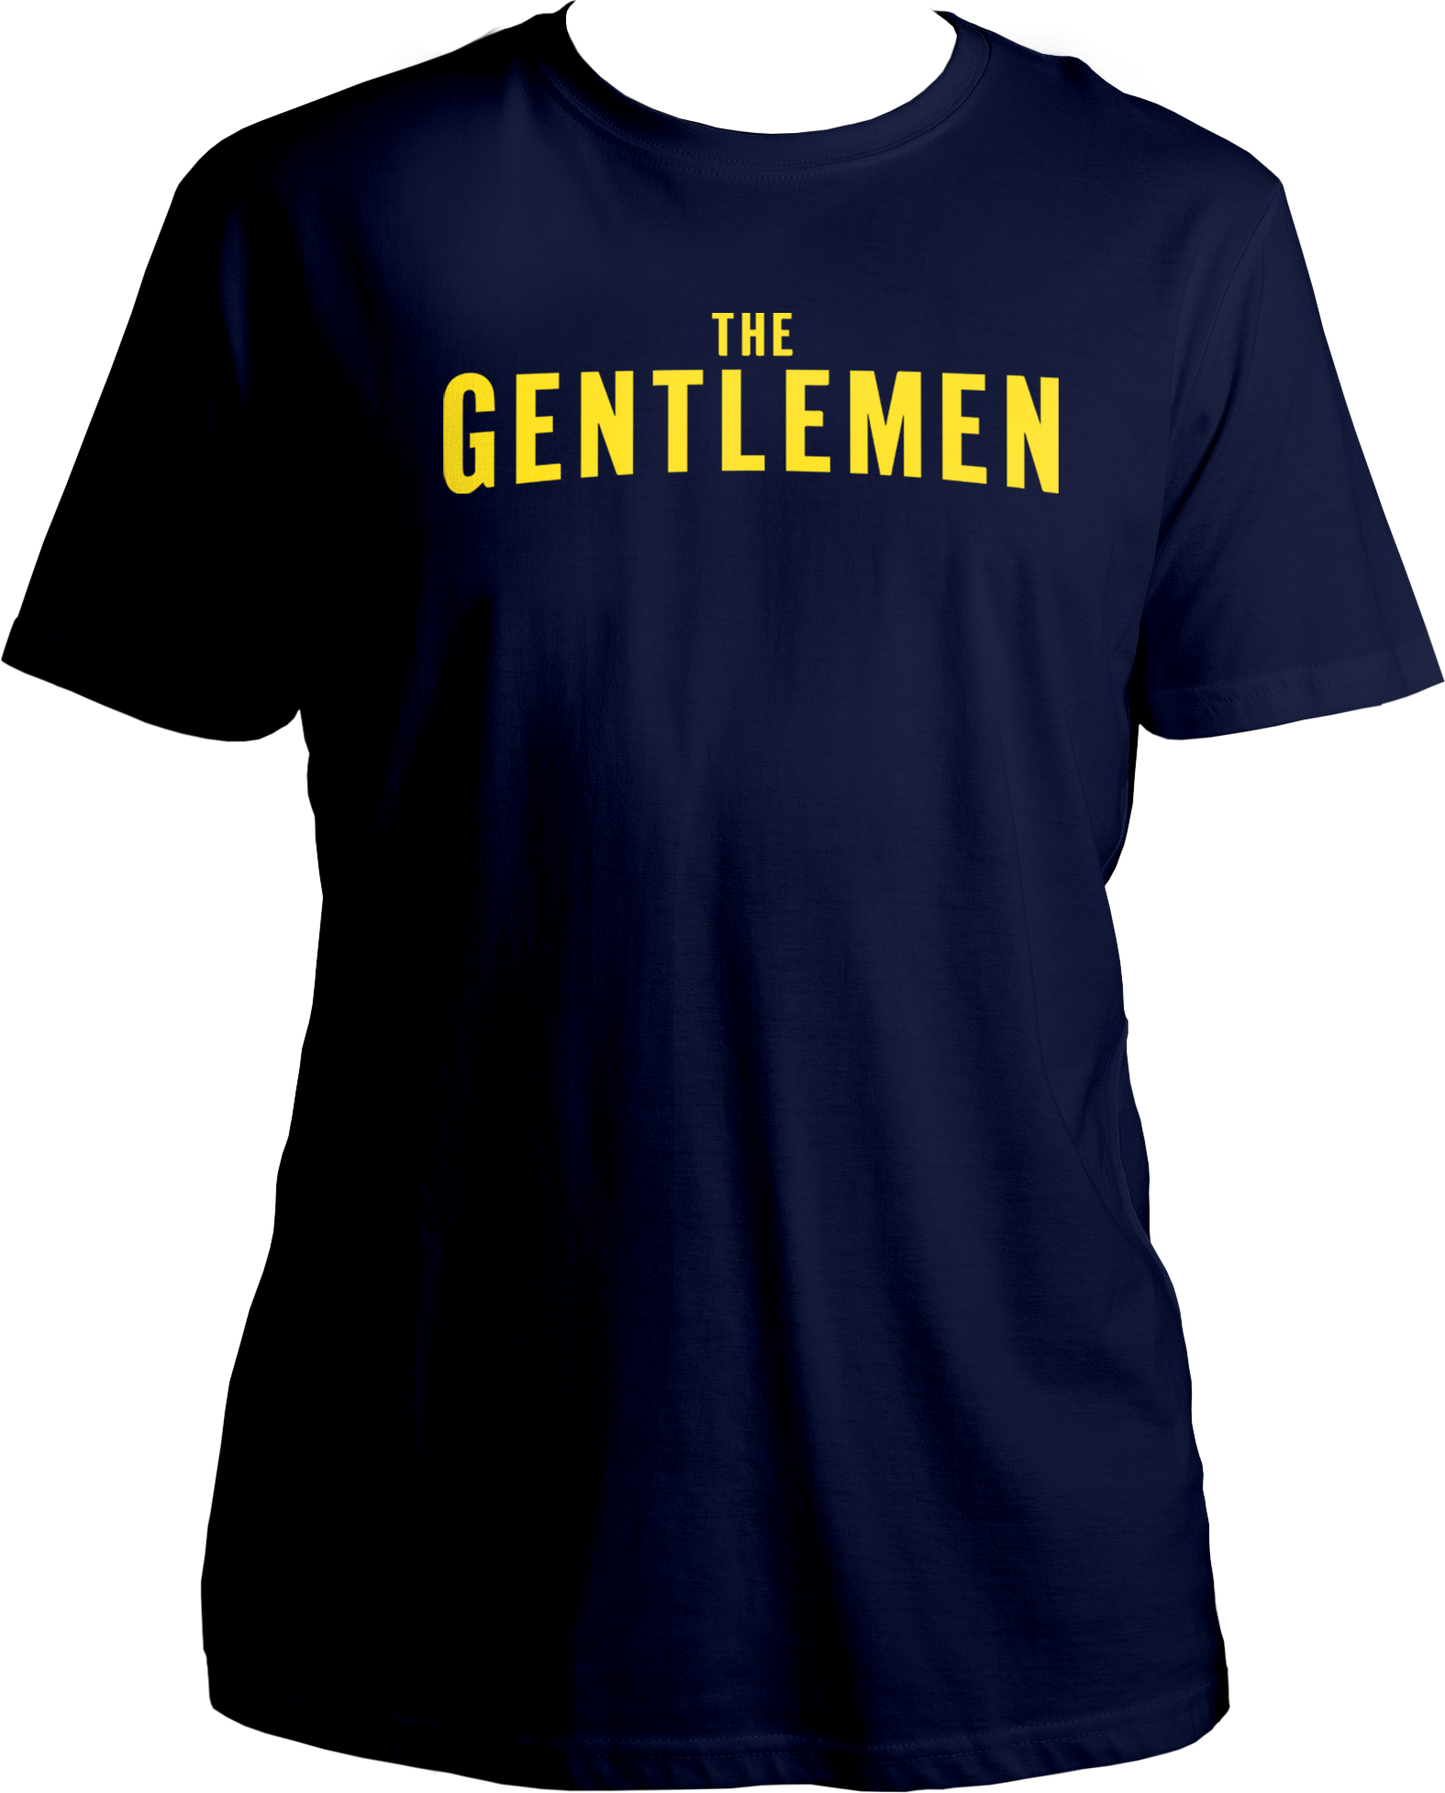 Whether you're a die-hard fan of The Gentlemen or simply appreciate quality apparel with a touch of pop culture flair, this t-shirt is a must-have addition to your wardrobe. Join the ranks of stylish fans and make a statement that's as sharp and witty as the show itself. Grab yours now and step into the world of The Gentlemen!